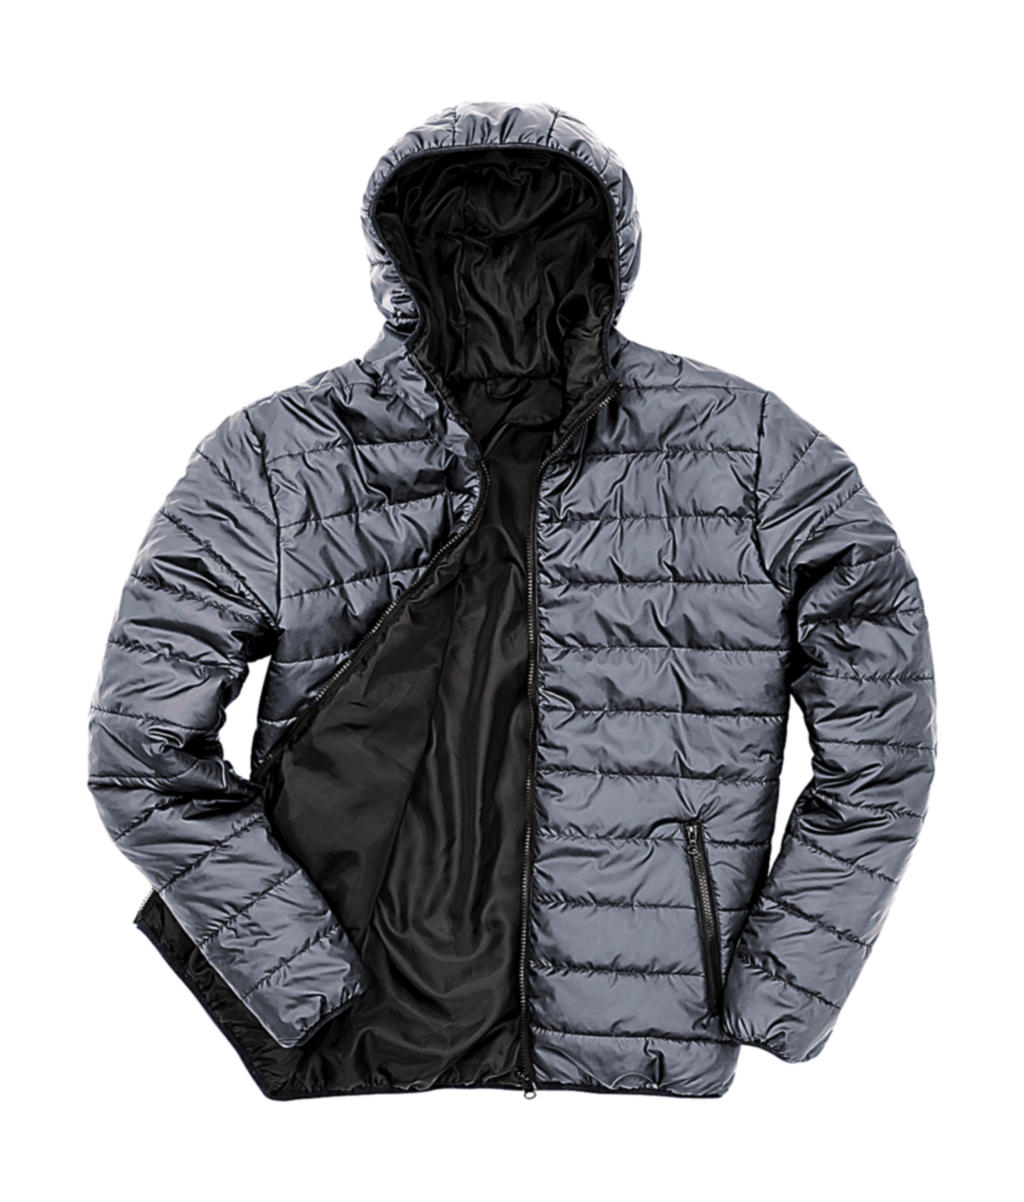  Soft Padded Jacket in Farbe Frost Grey/Black